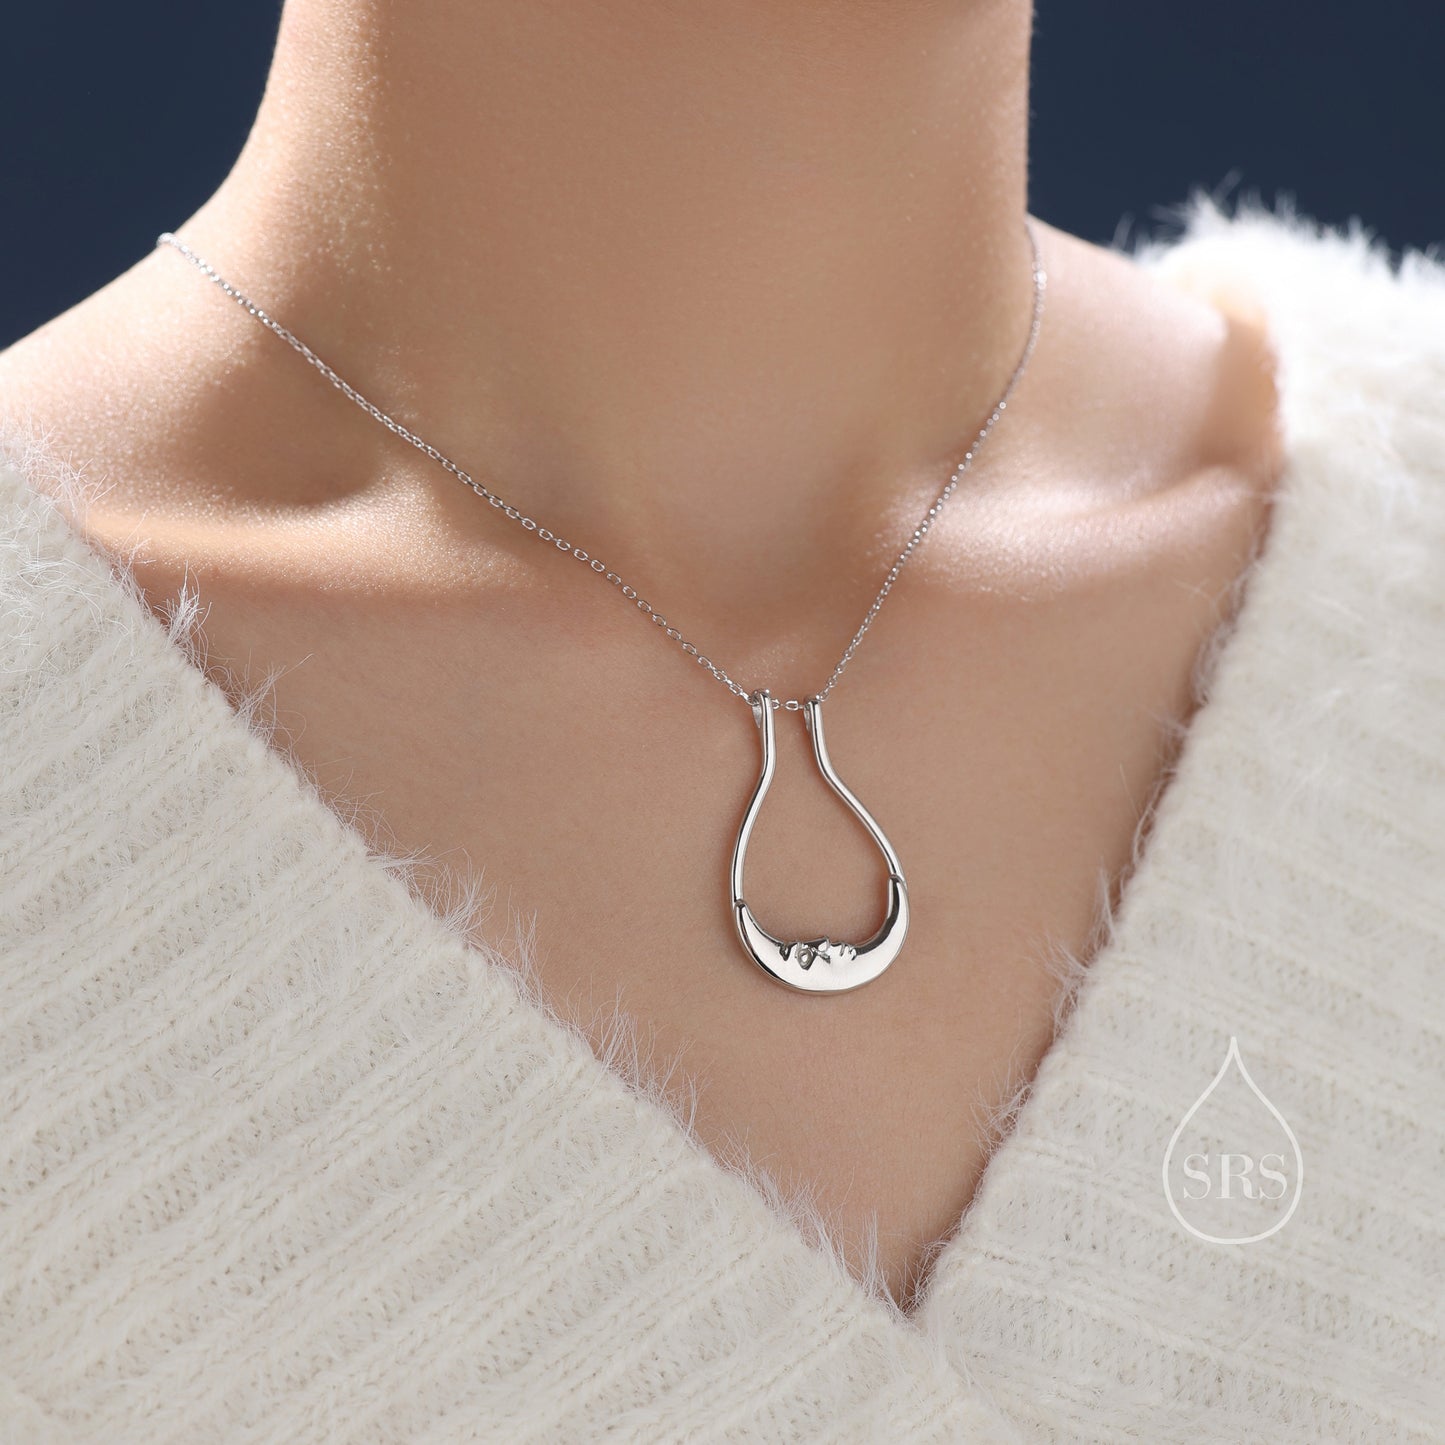 UK Only Item. Moon Face Minimalist Necklace in Sterling Silver, Silver or Gold or Rose gold, Geometric Pendant Necklace. Ring Holder Necklace